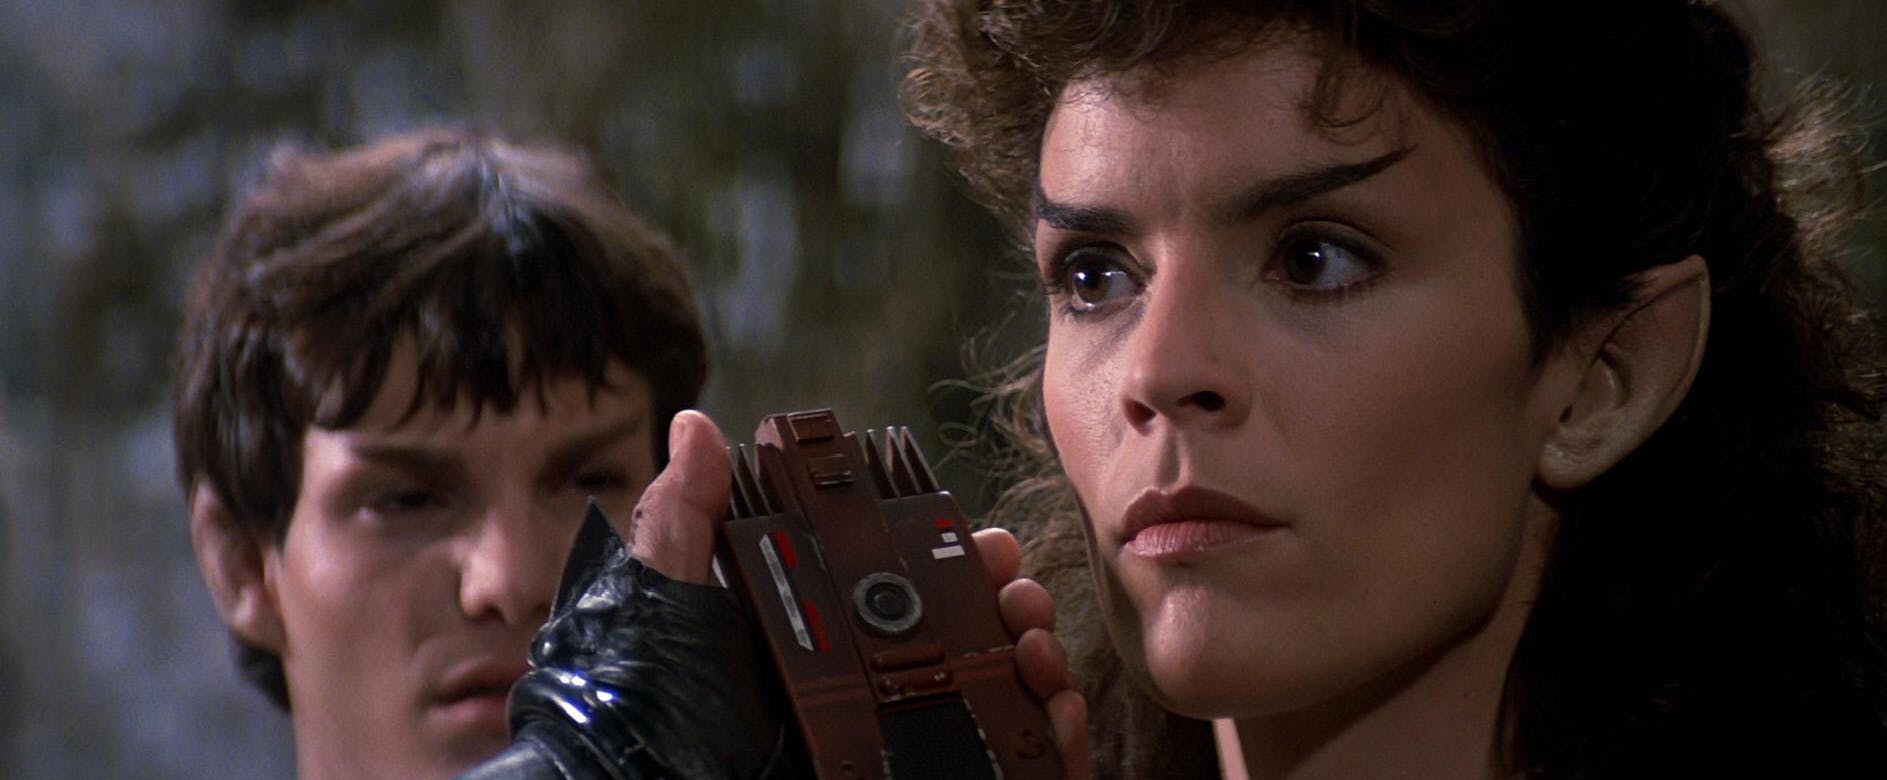 A close-up of Saavik's expression as a Klingon holds a communicator to her as a younger Spock looks towards her in Star Trek III: The Search for Spock